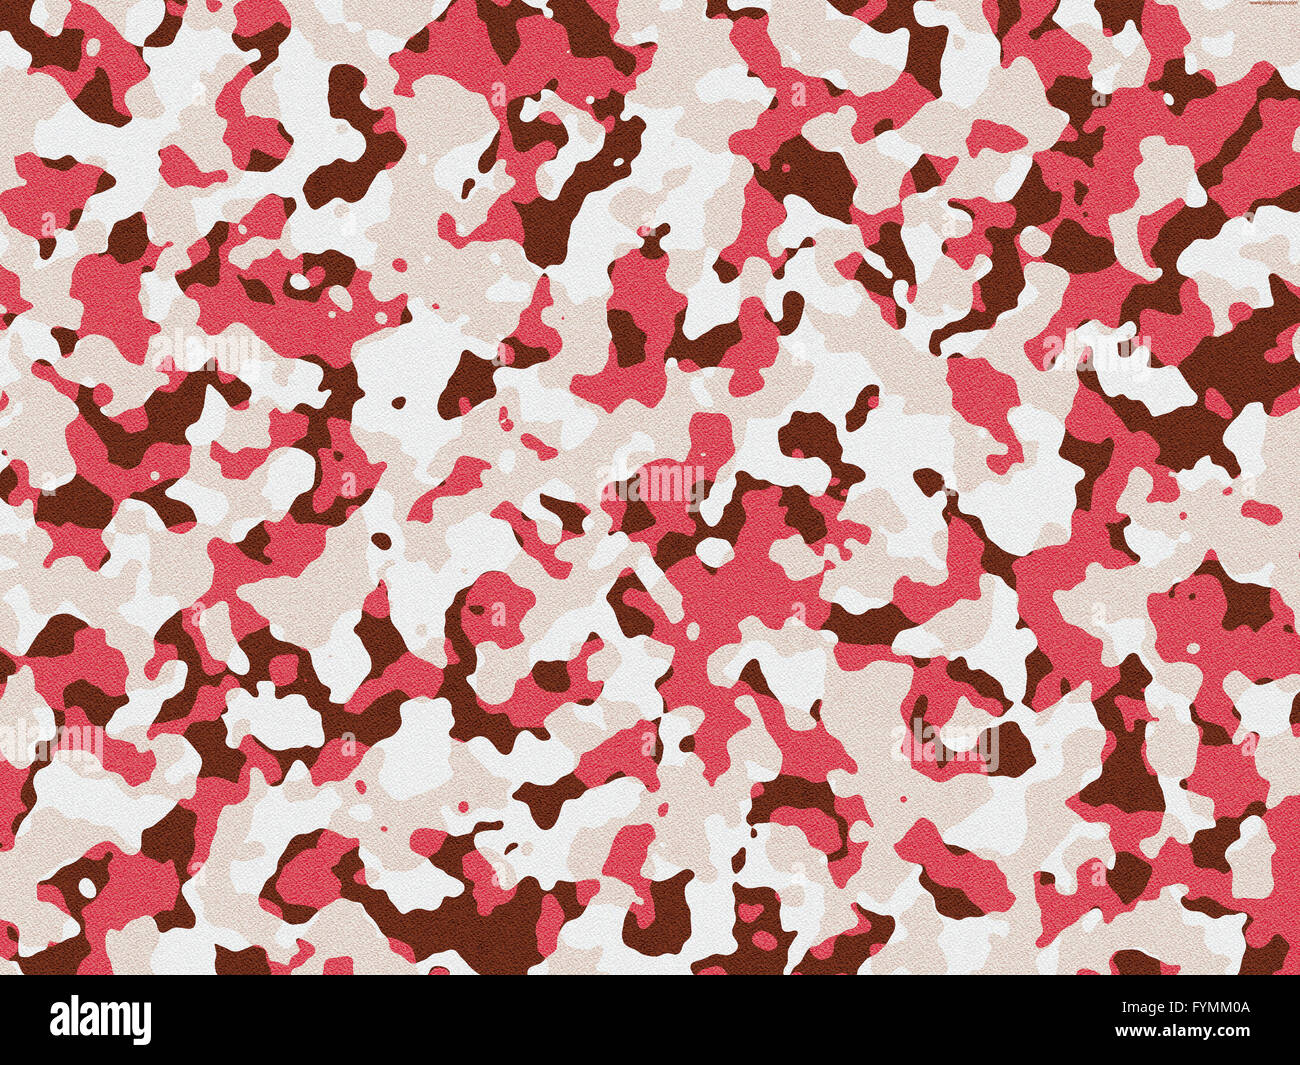 Seamless Red Camo Stock Illustrations – 1,390 Seamless Red Camo